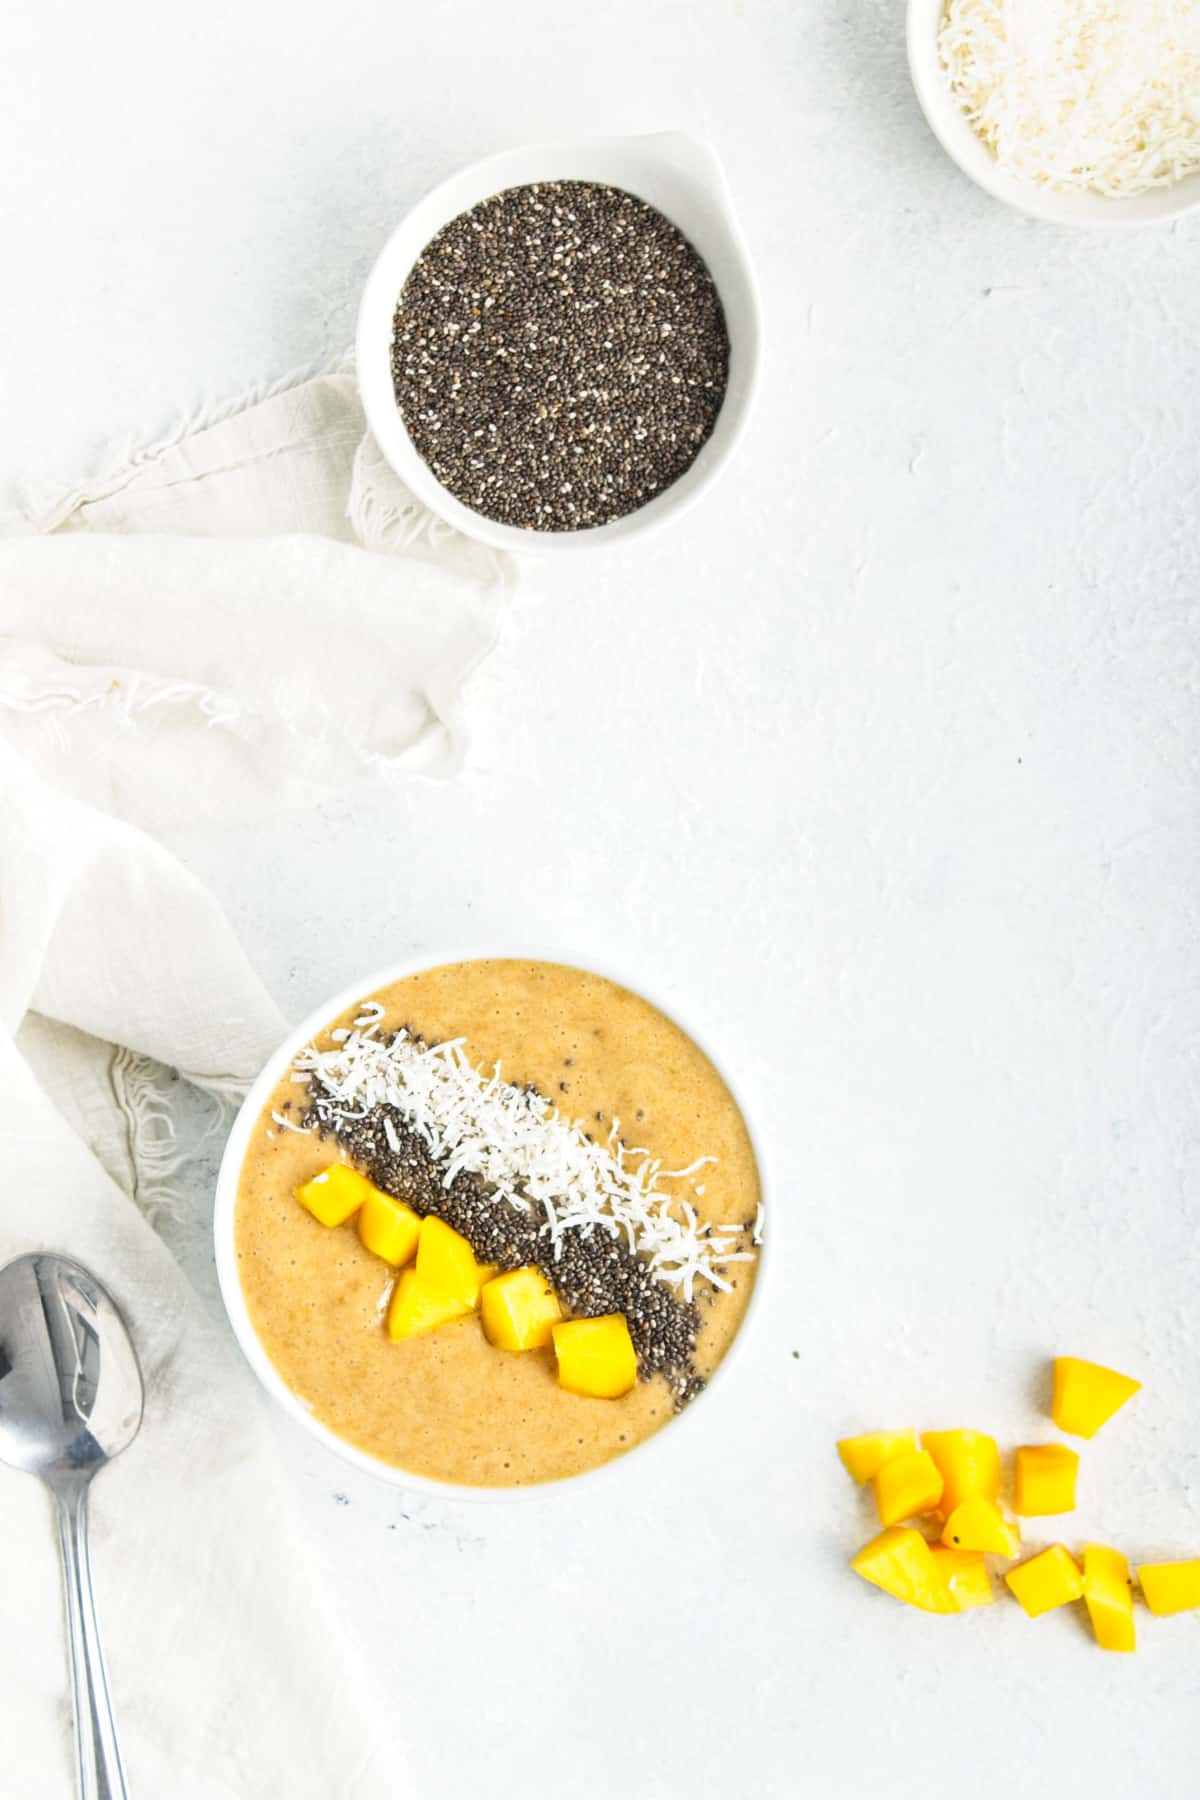 A smoothie bowl next to bowls of chia seeds and shredded coconut.